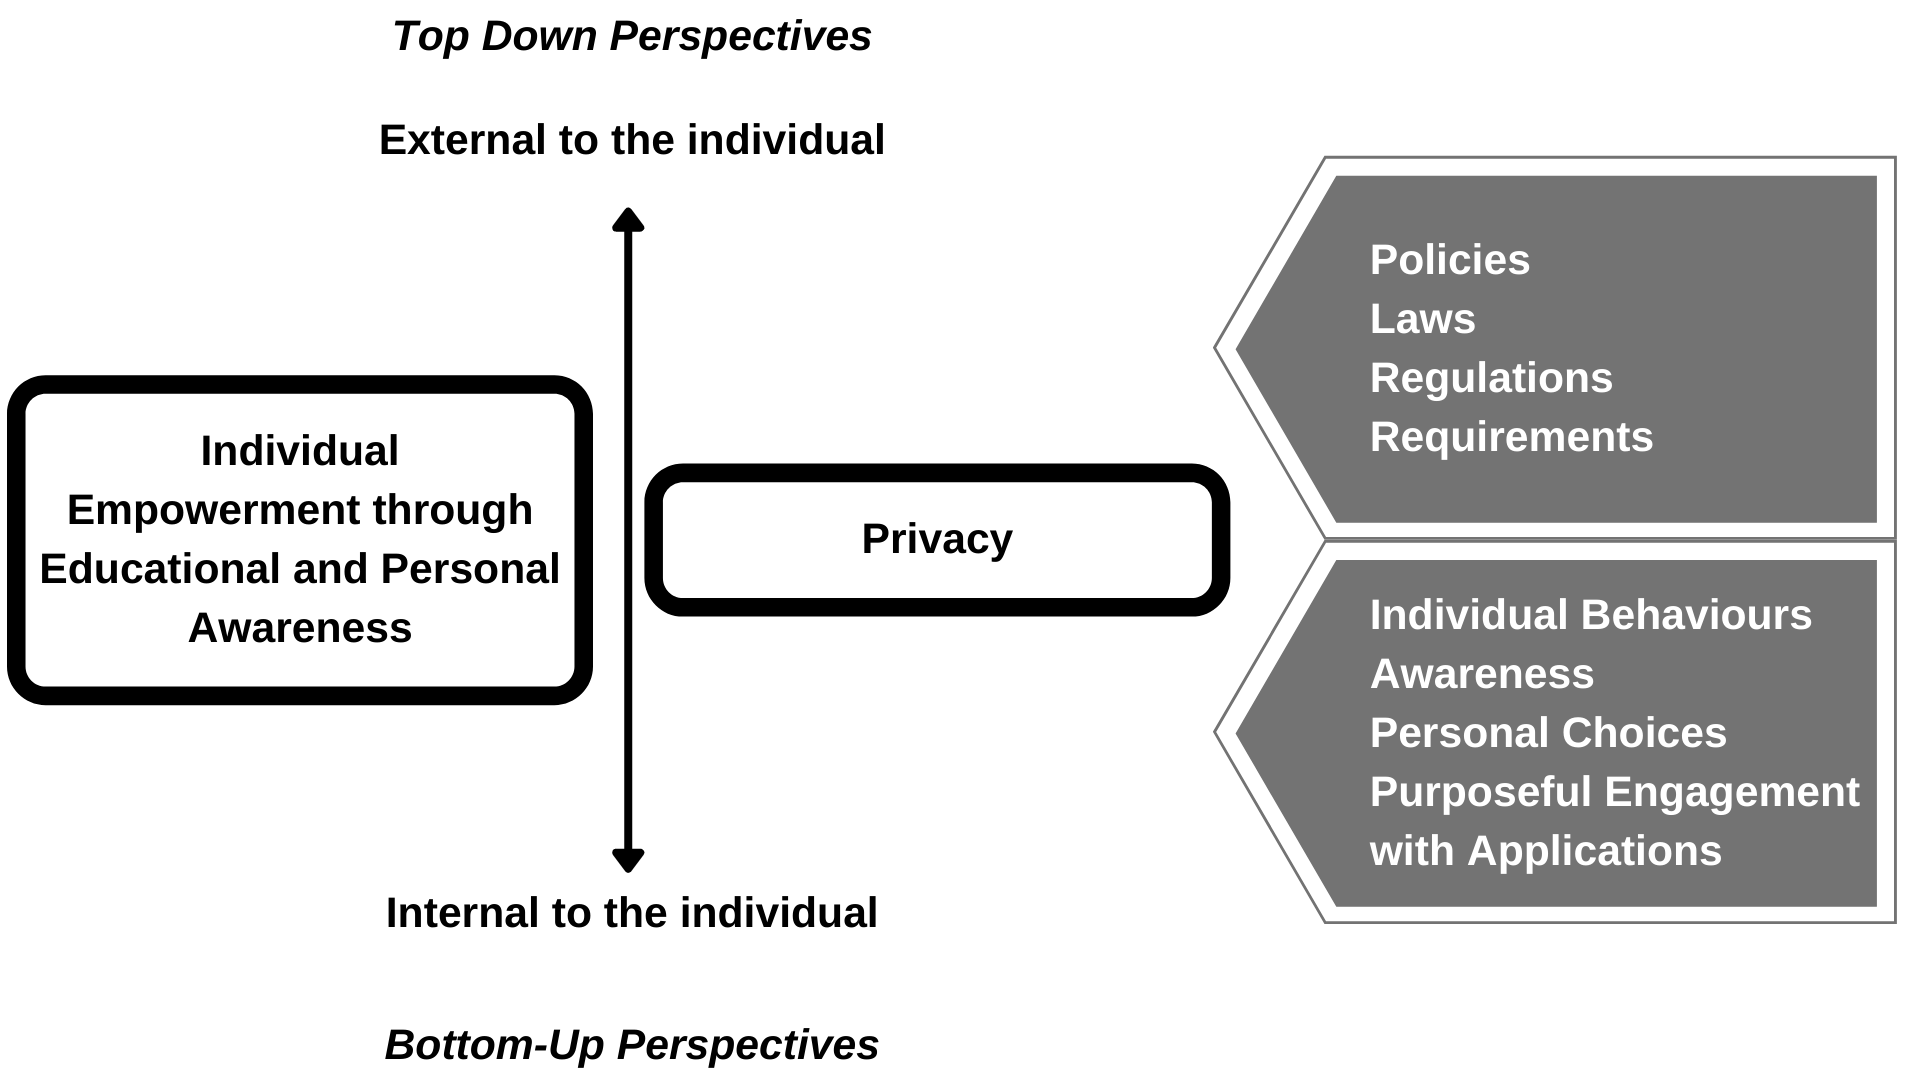 Privacy central. Y-Axis: Top Down Perspectives with External to the individual; Bottom-Up Perspectives with Internal to the individual. X-Axis: Individual Empowerment through Educational and Personal Awareness; Policies Laws Regulations Requirements and Individual Behaviours Awareness Personal Choices Purposeful Engagement with Applications.